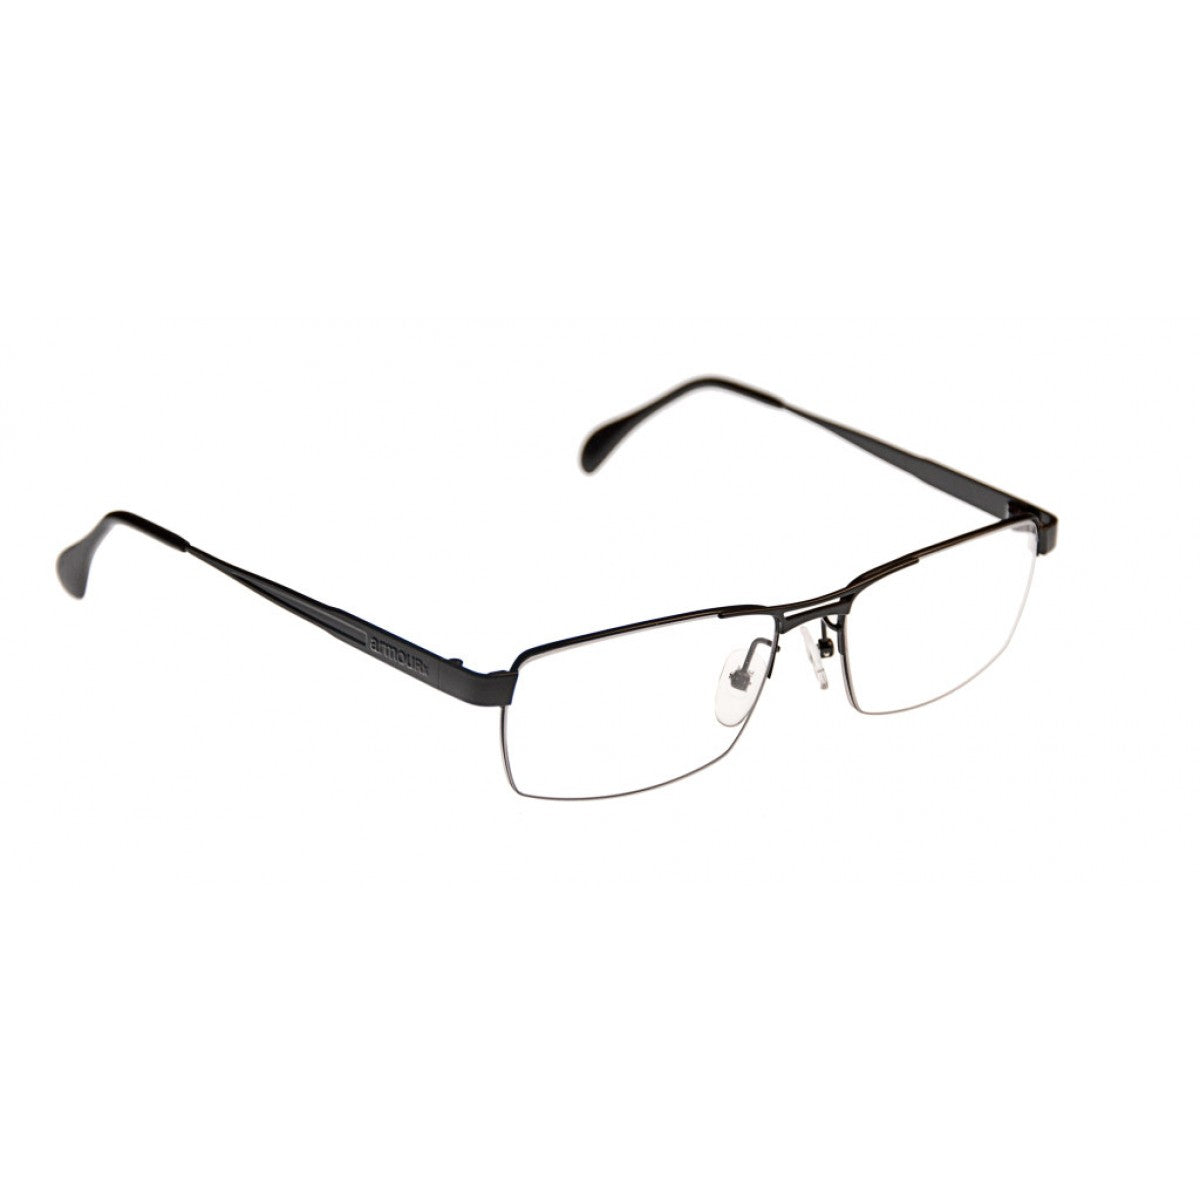 Armourx Safety Classic Eyeglasses 7404